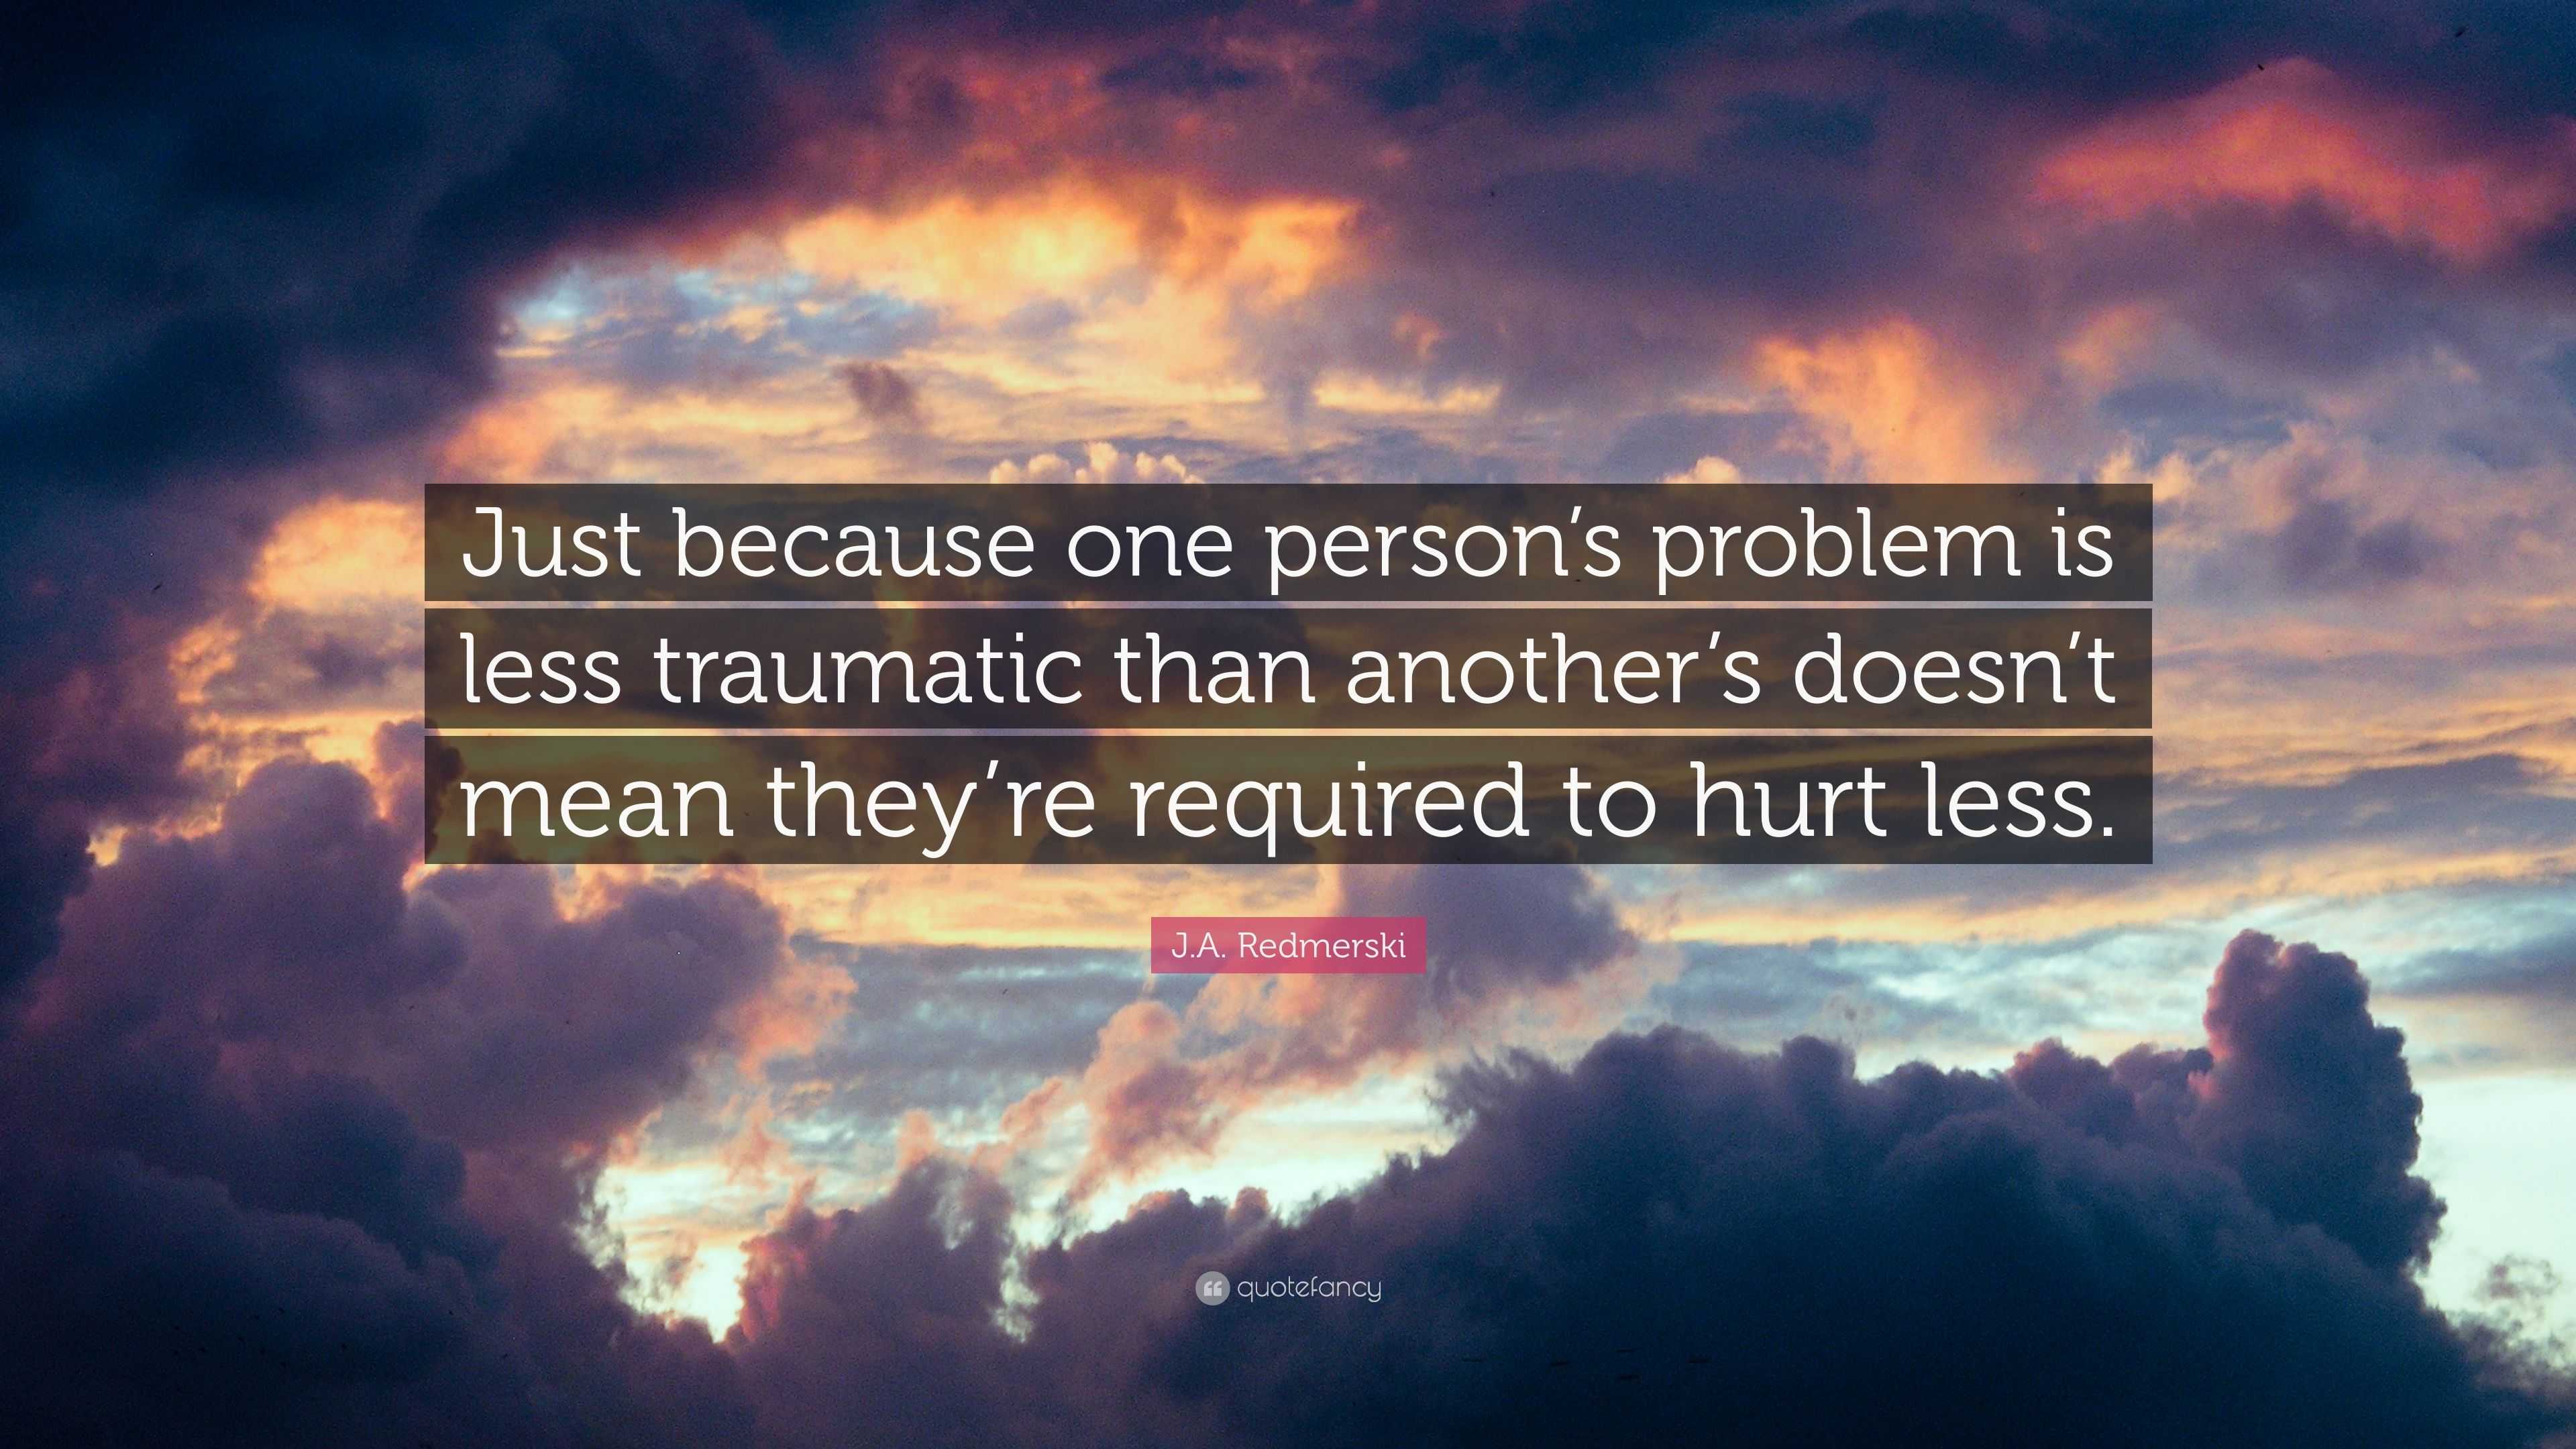 J.A. Redmerski Quote: “Just because one person's problem is less traumatic  than another's doesn't mean